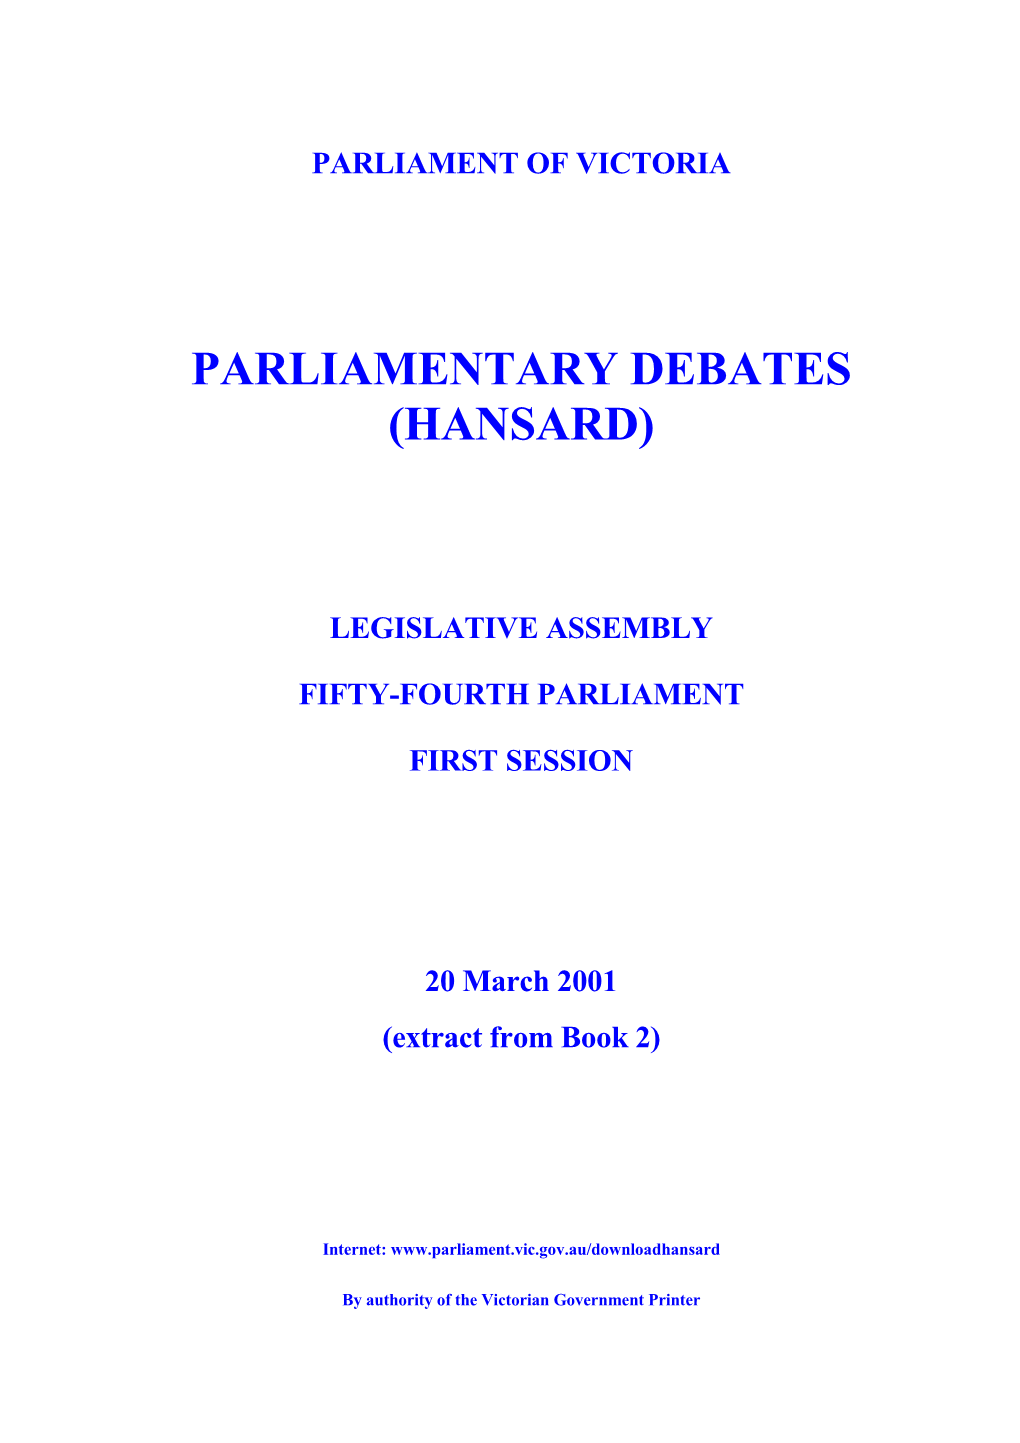 Assembly Parlynet Extract 20 March 2001 from Book 2